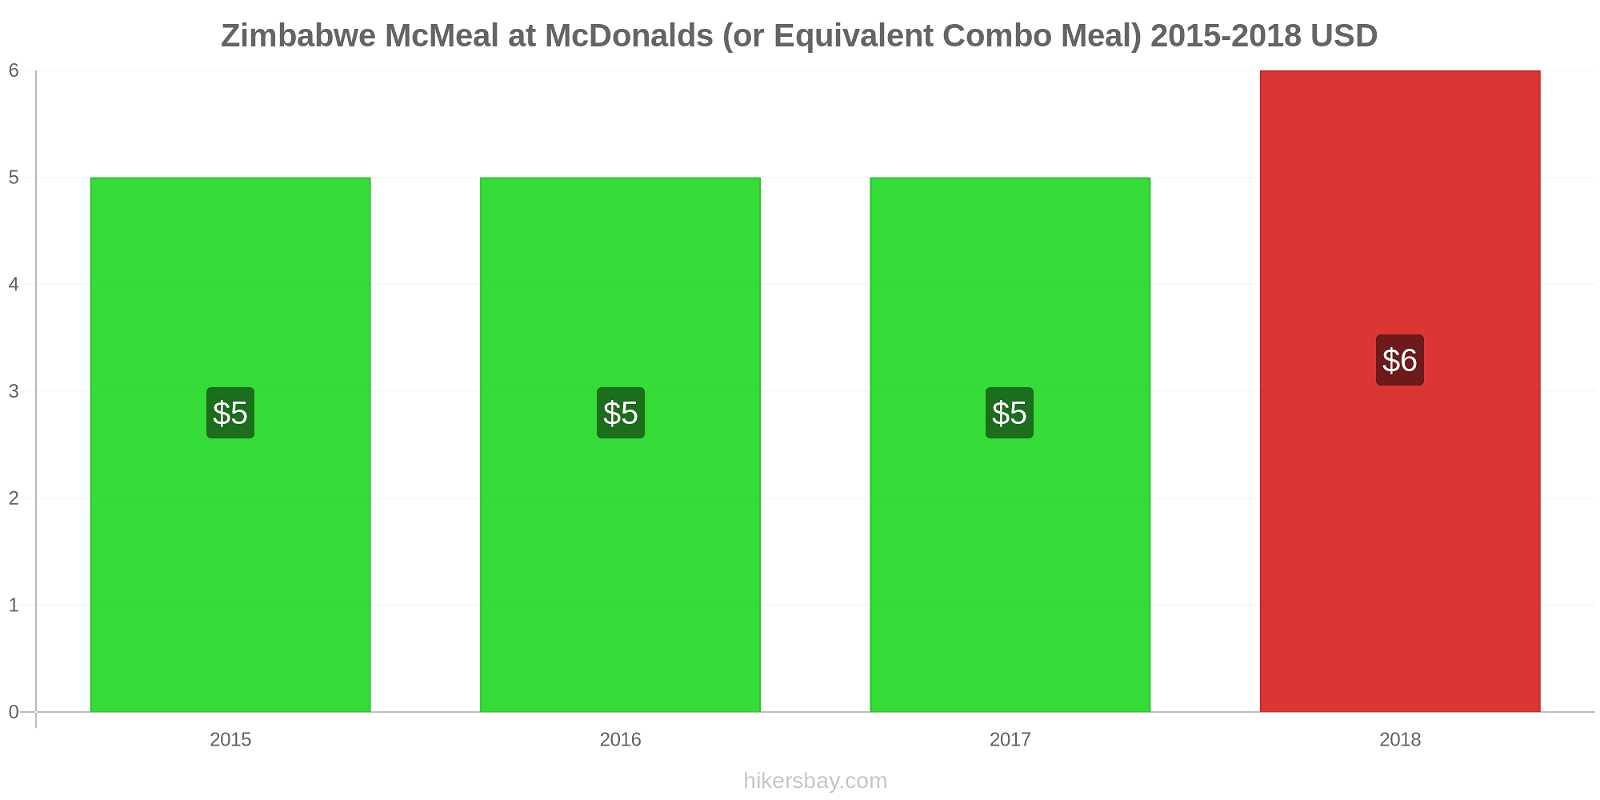 Zimbabwe price changes McMeal at McDonalds (or Equivalent Combo Meal) hikersbay.com